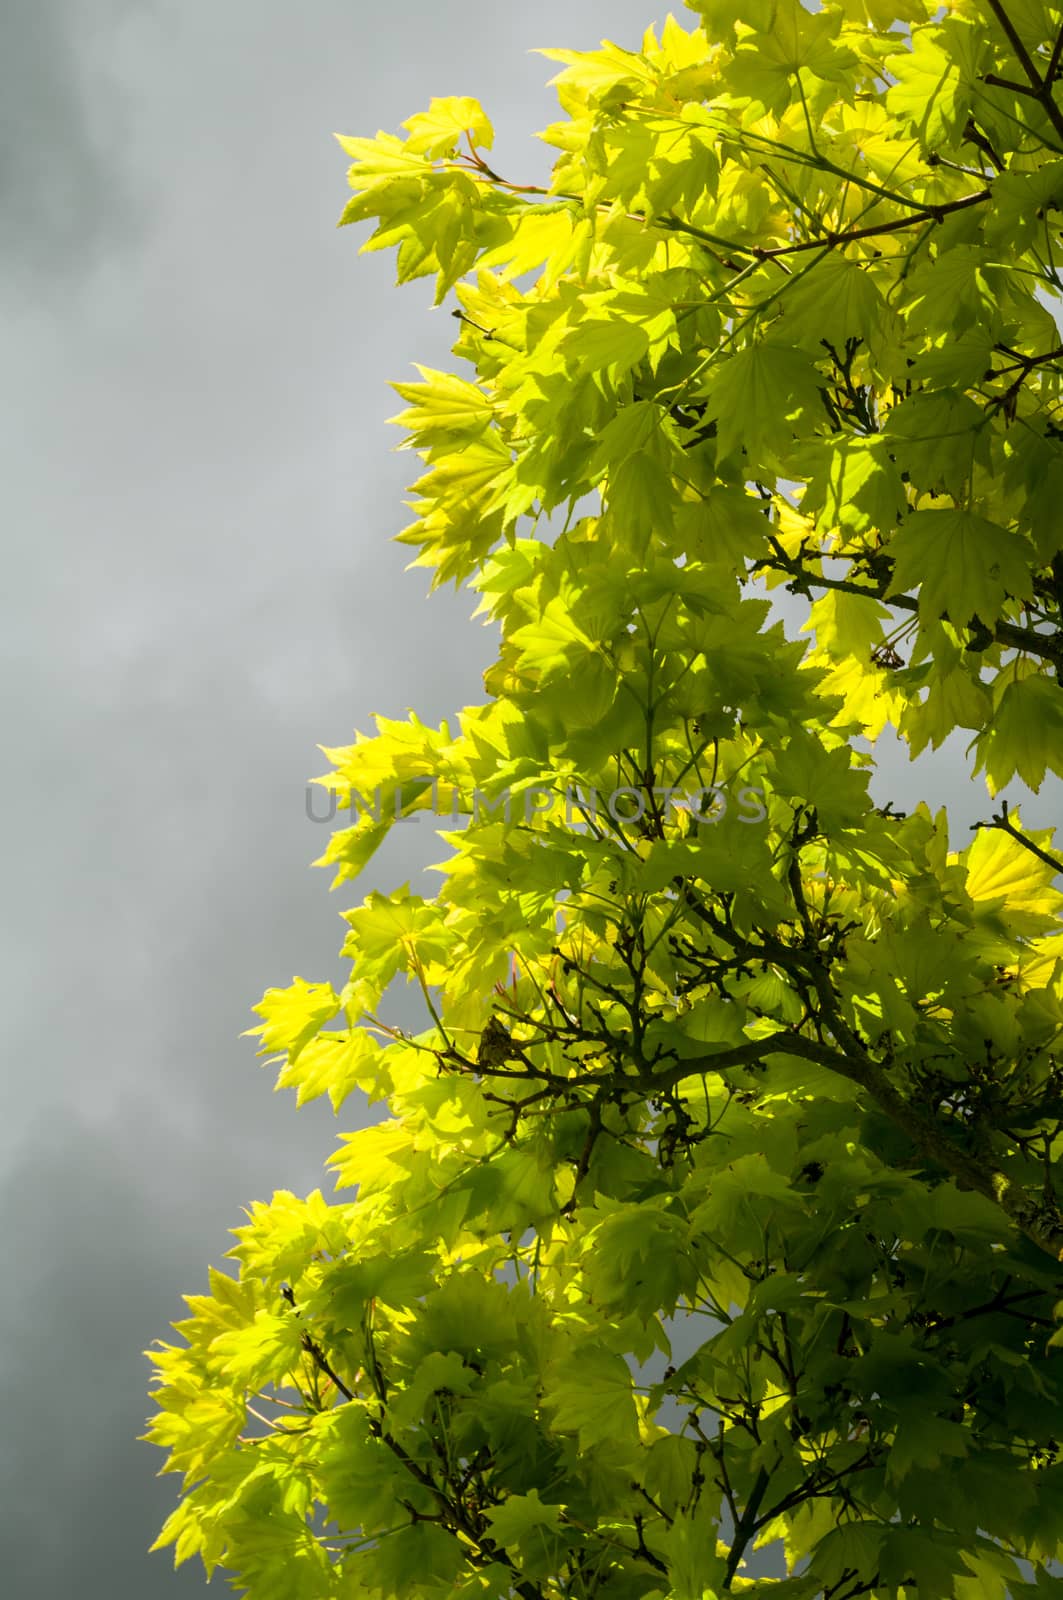 Backlit green leaves  with contrasting grey clouds